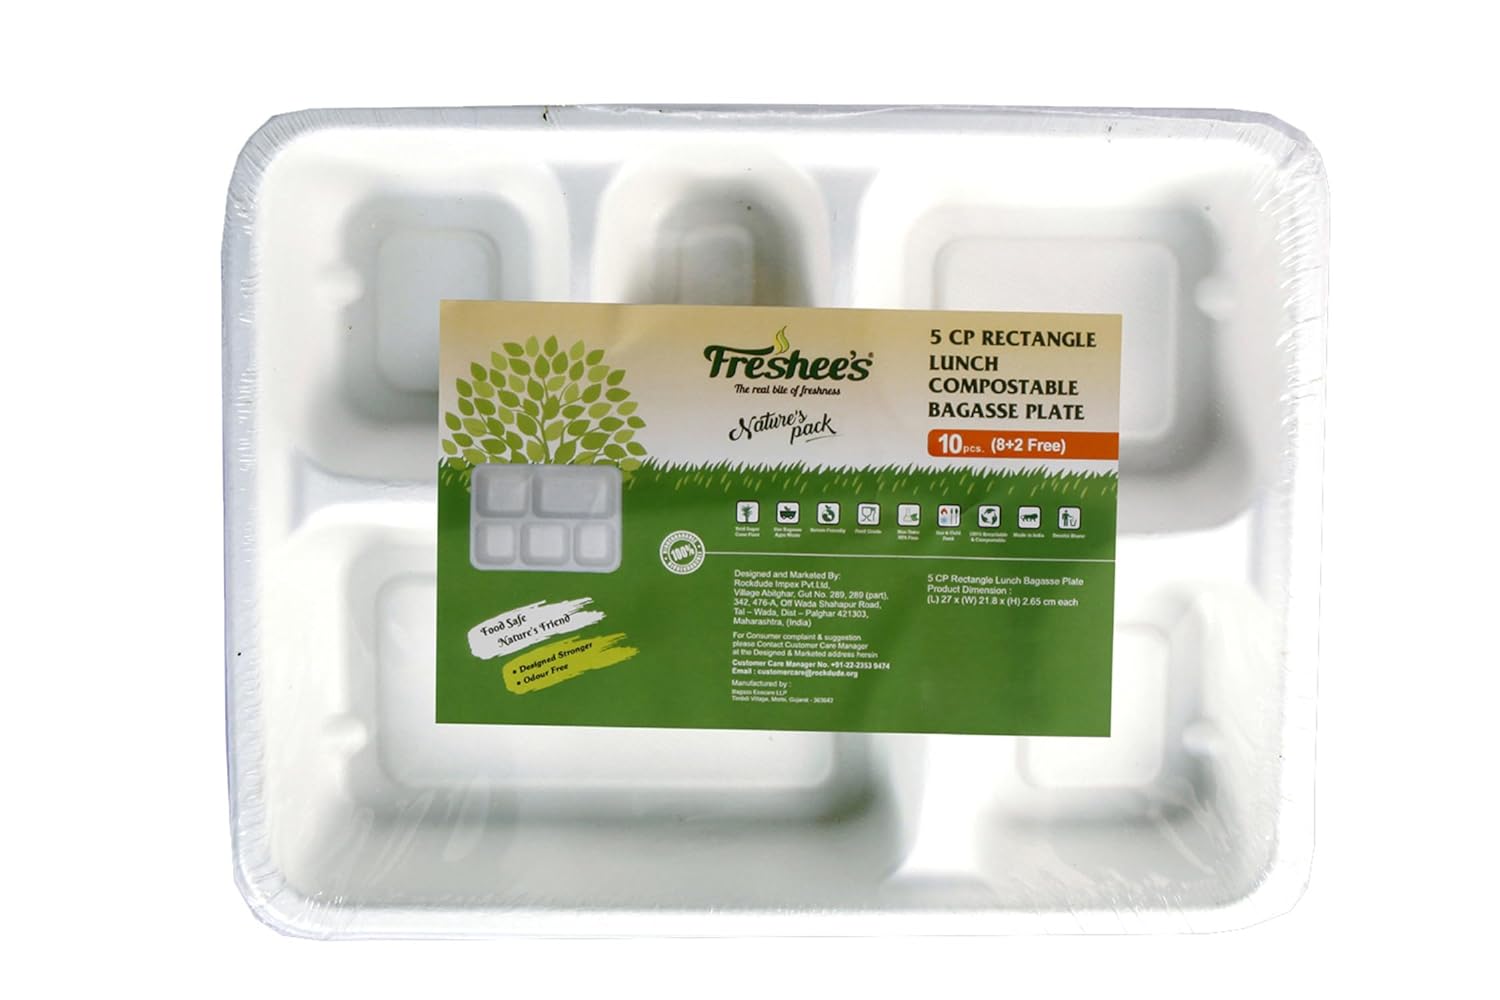 Freshee 5CP Reactangle lunch compostable bagasse plate